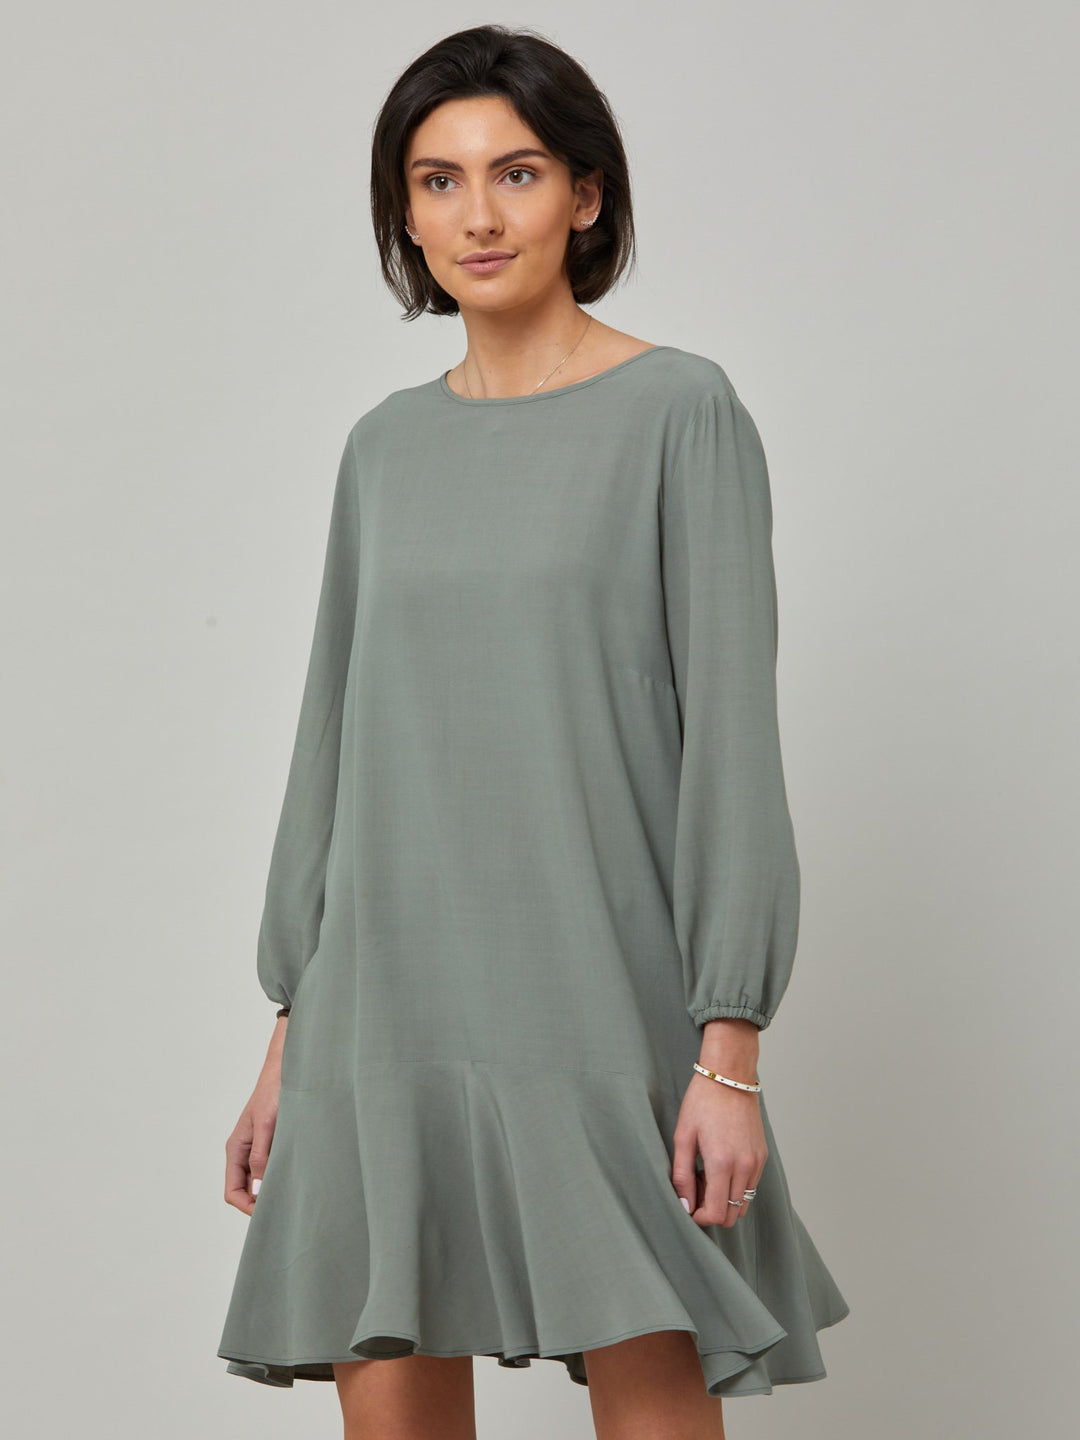 Sheila, a great everyday dress. Crafted in our fluid lichen green viscose crepe. A flirty knee-grazing shift dress with a soft elasticated cuff sleeve that falls to a deep frill hem with a jewel neckline and key-hole back detail. For everyday comfort style with trainers. Elevate your mood with this fun piece.